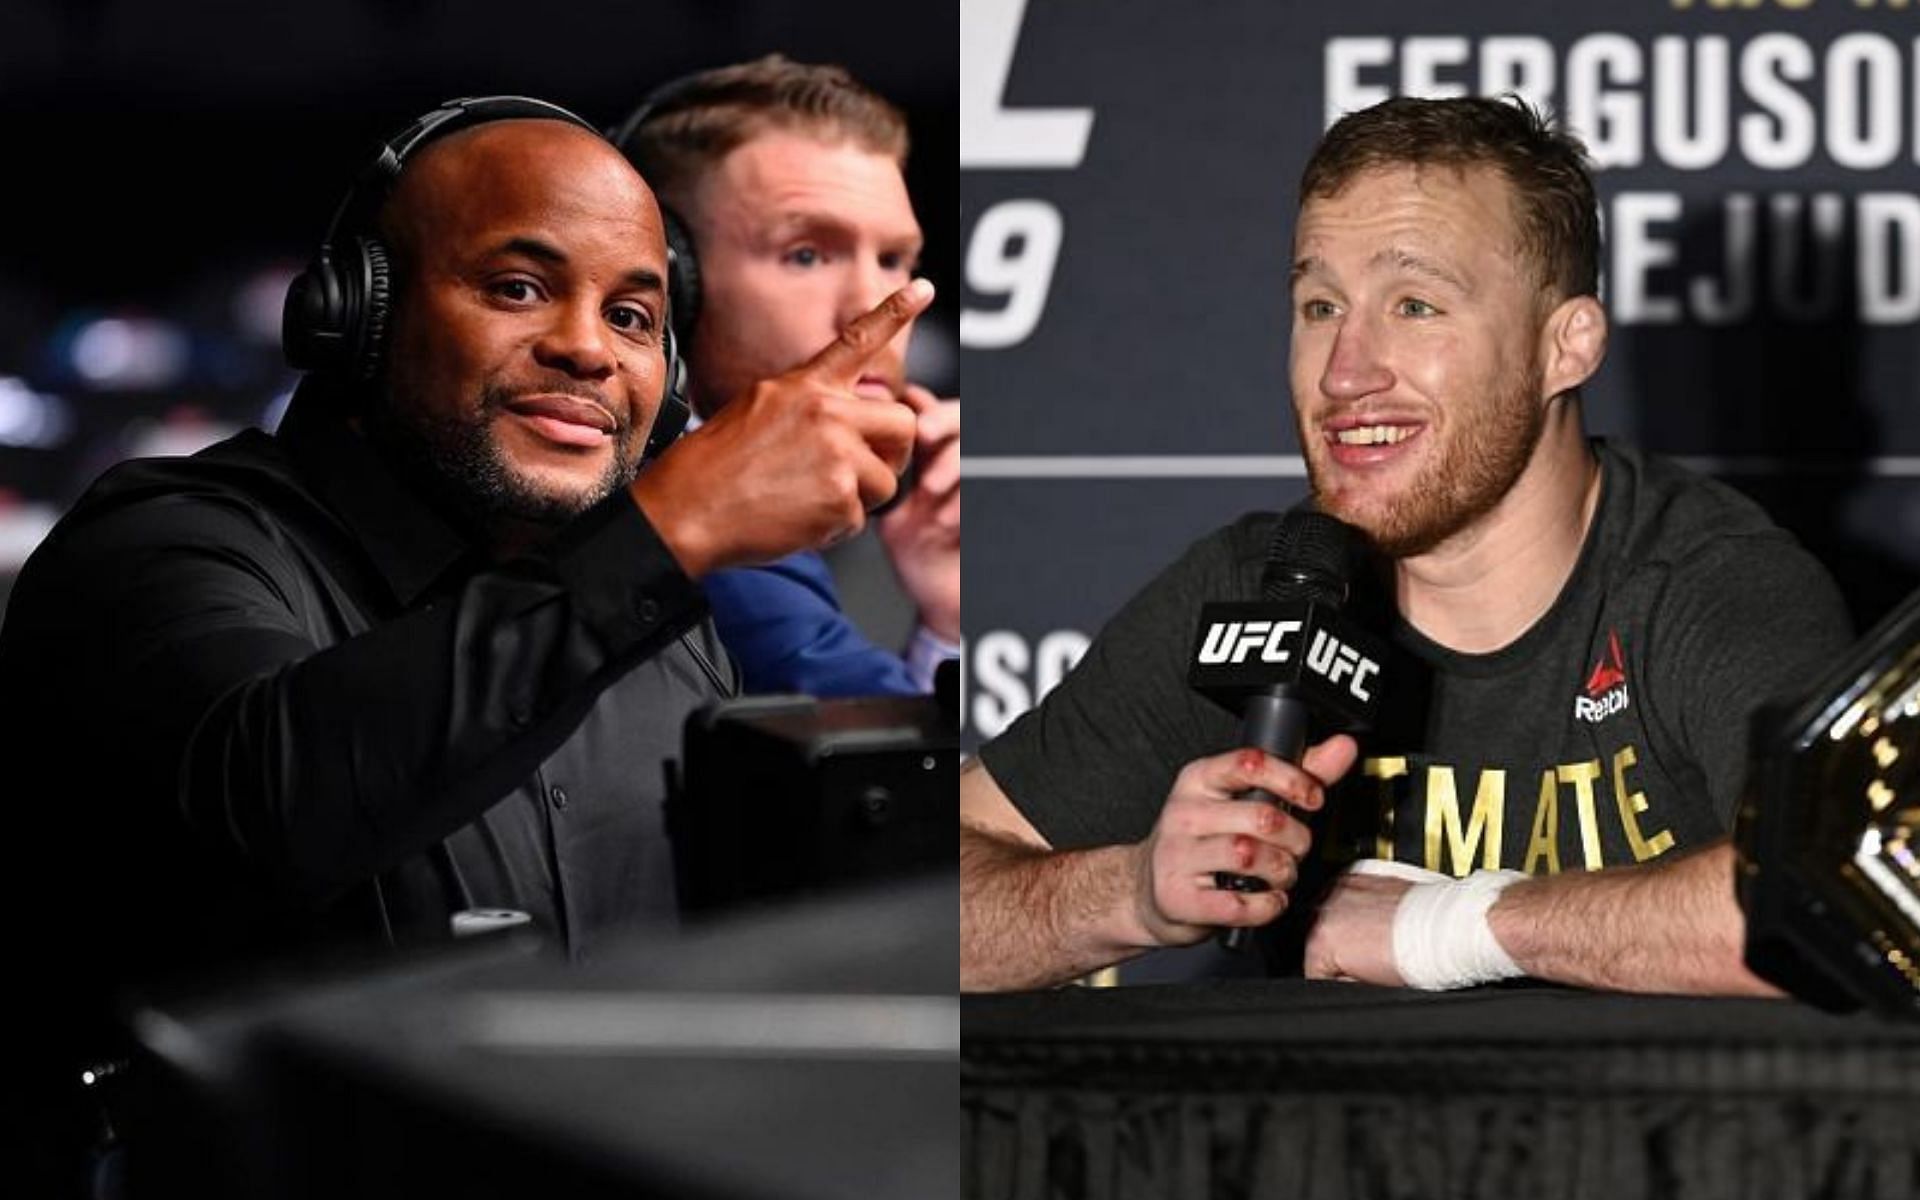 Daniel Cormier (left) and Justin Gaethje (right) [Left image courtesy: @dc_mma on Instagram]